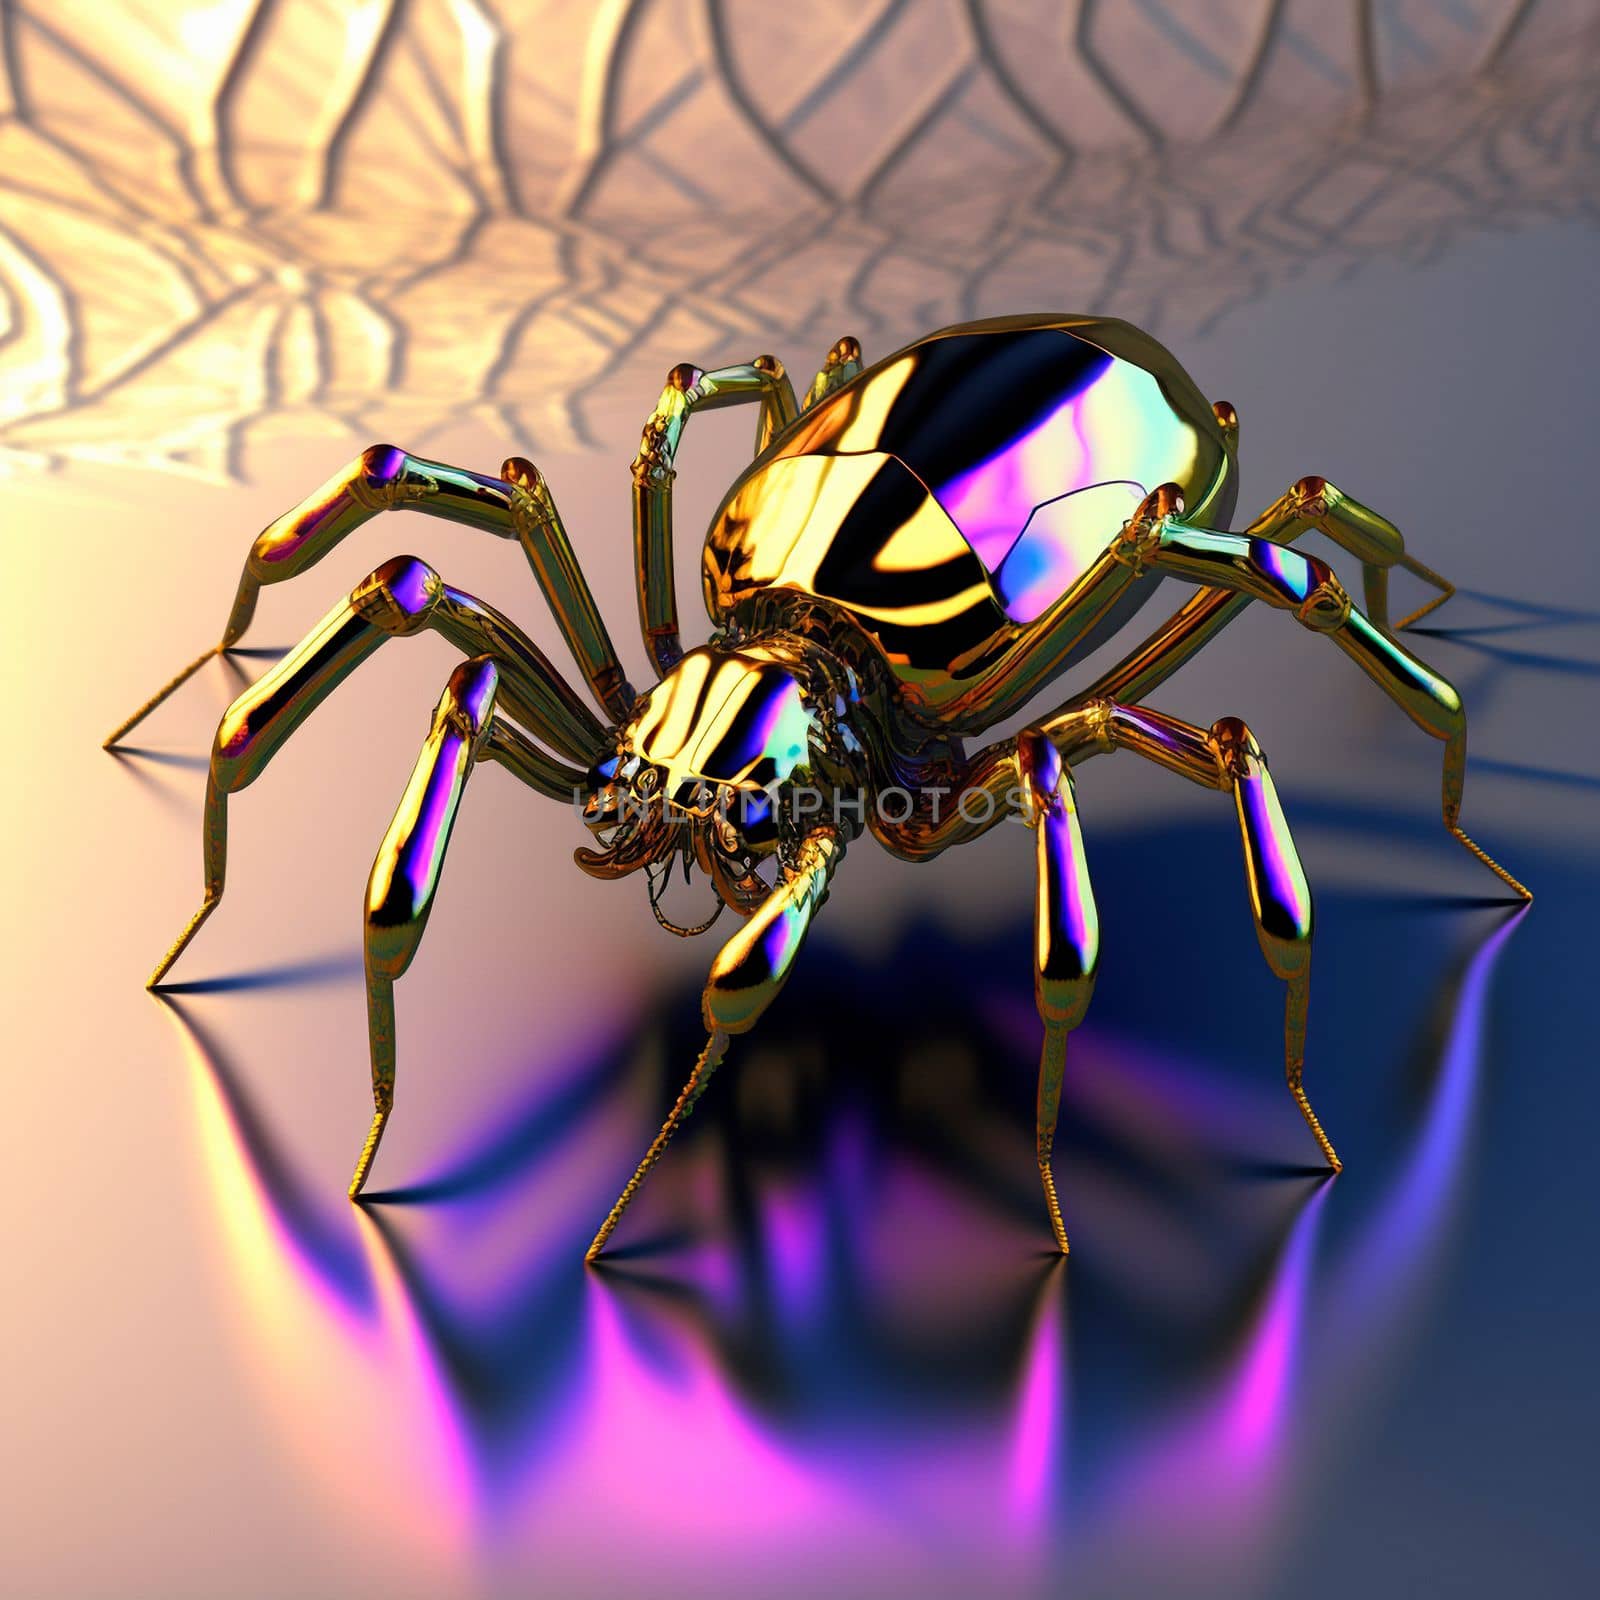 3d model of a pink and gold spider. Shiny , glossy figure by NeuroSky